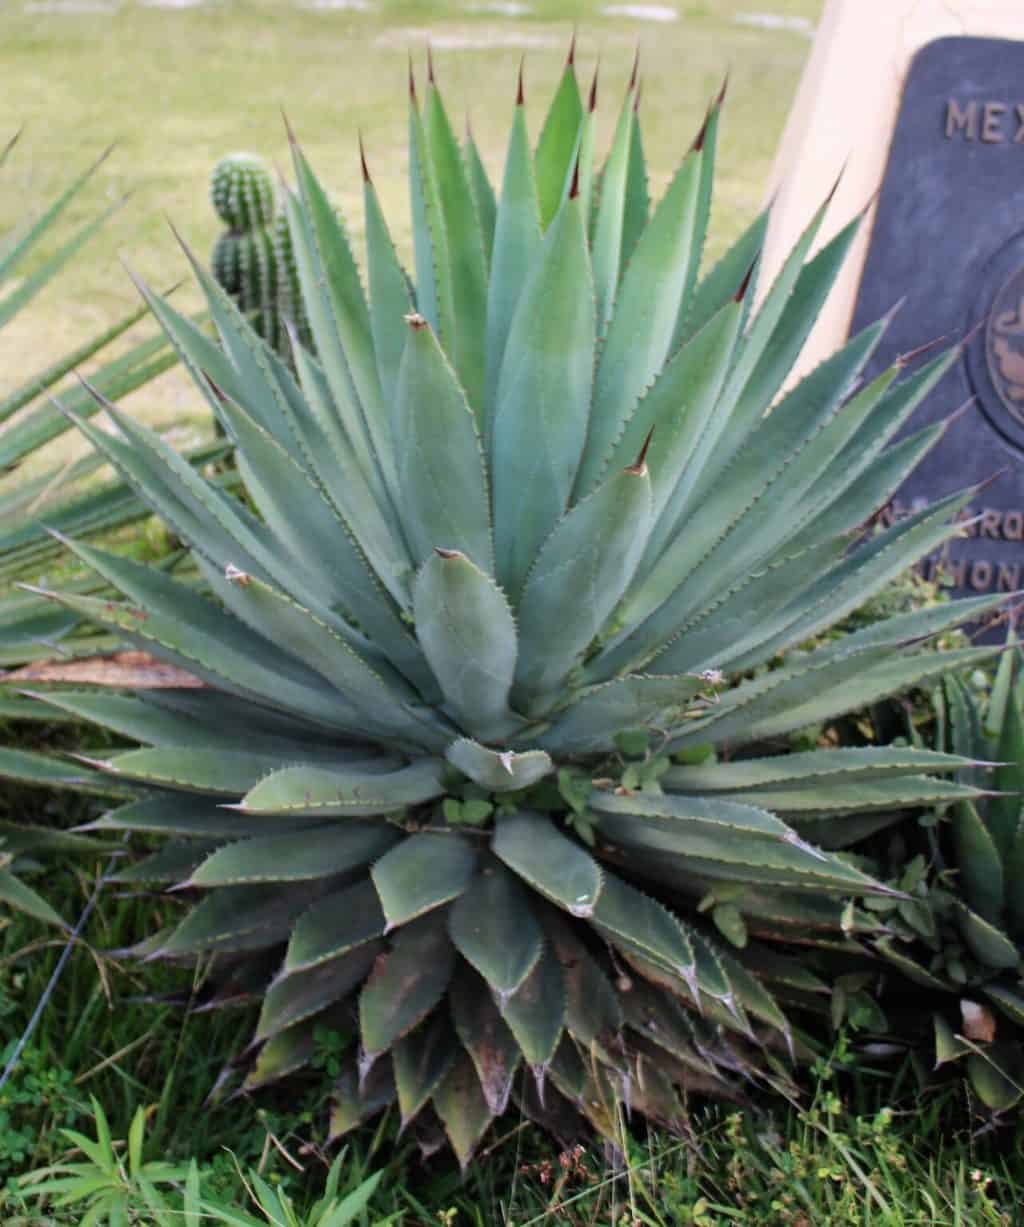 19 Types of Agave Plants With Pictures | Yard Surfer